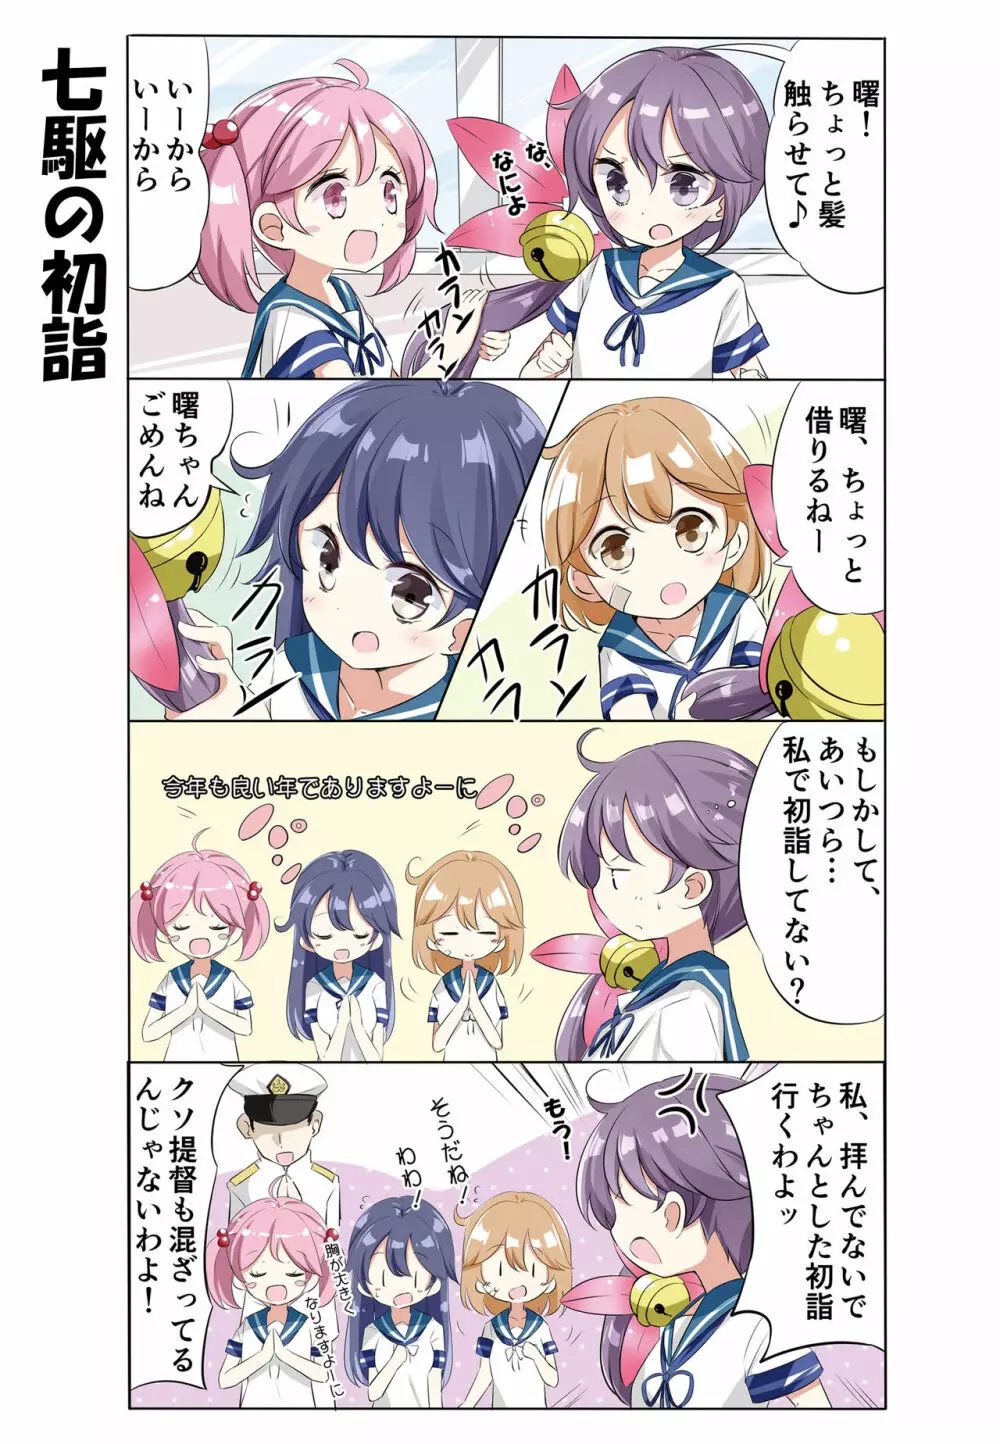 hamaken collection 総集編vol 9～12 プラス 七駆の乳くらべ Page.66